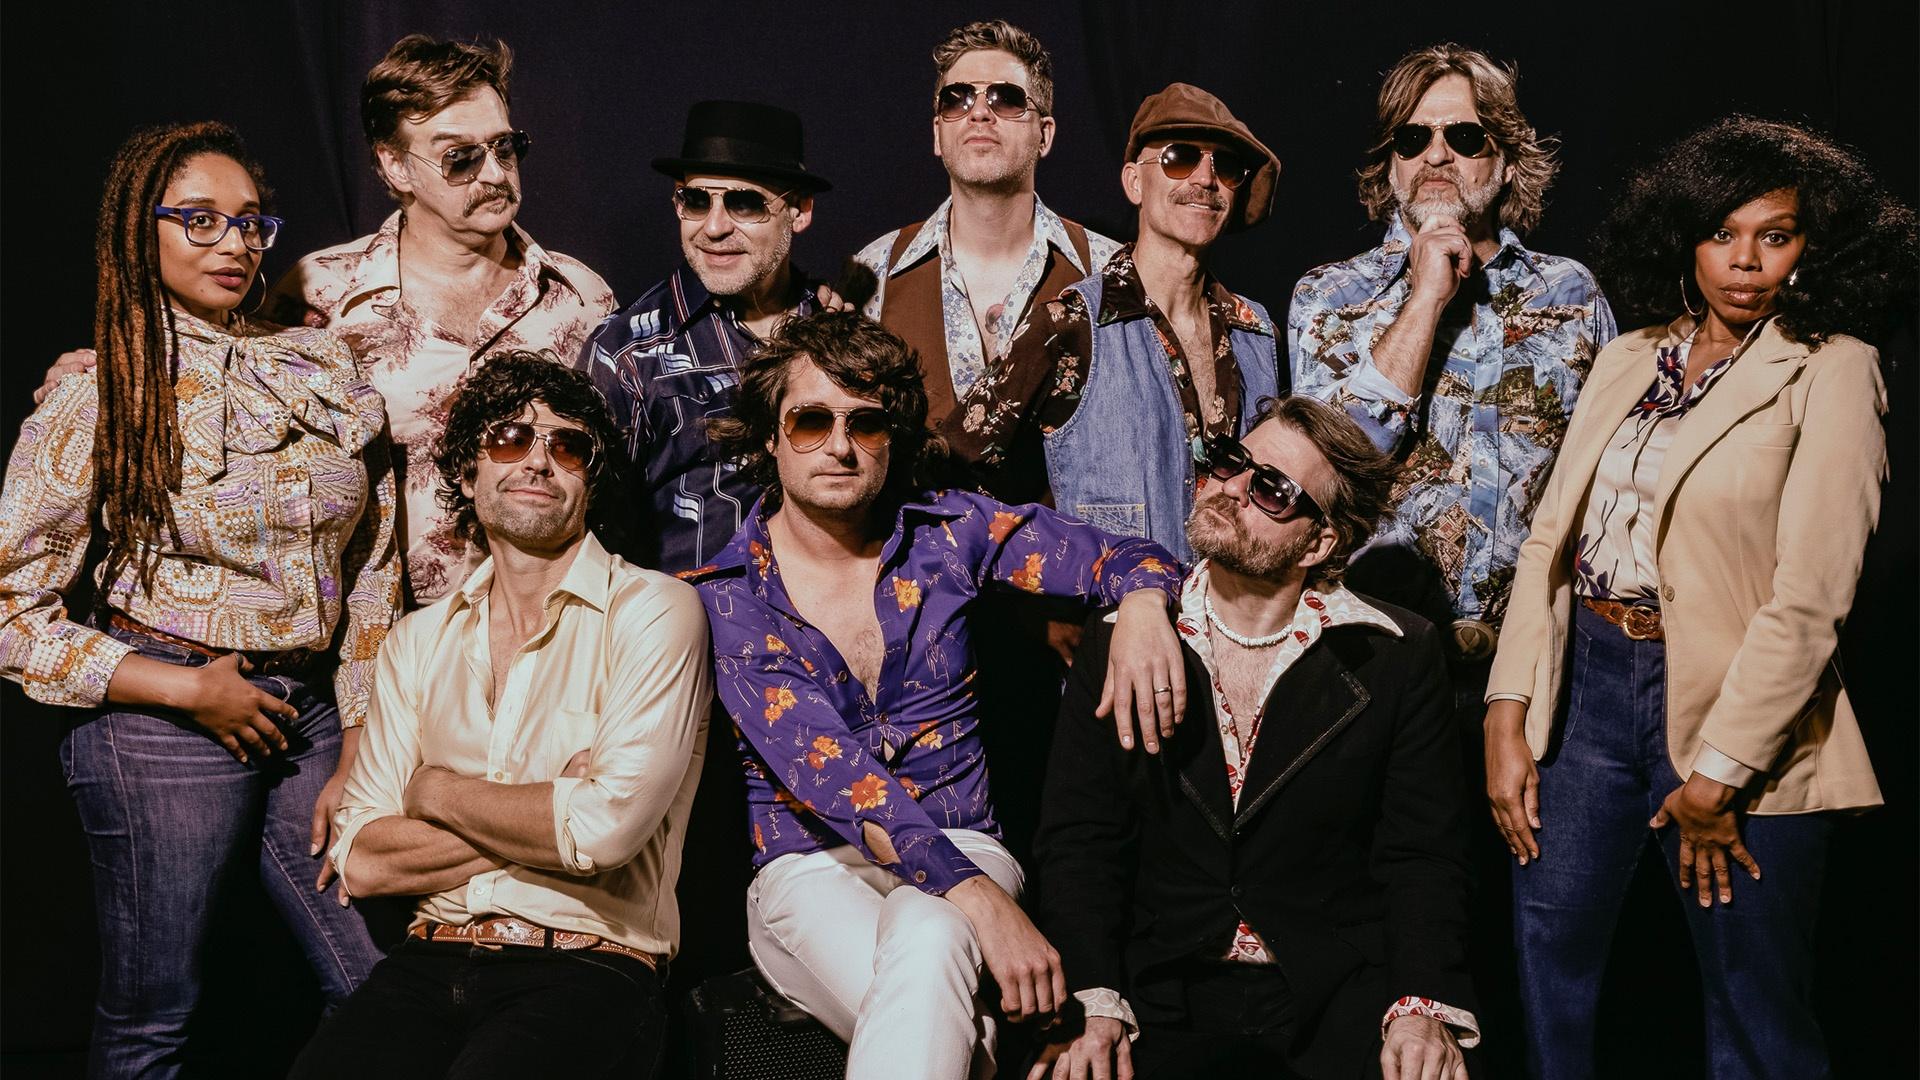 Yacht Rock Revue: 70s & 80s Hits, Live from New York